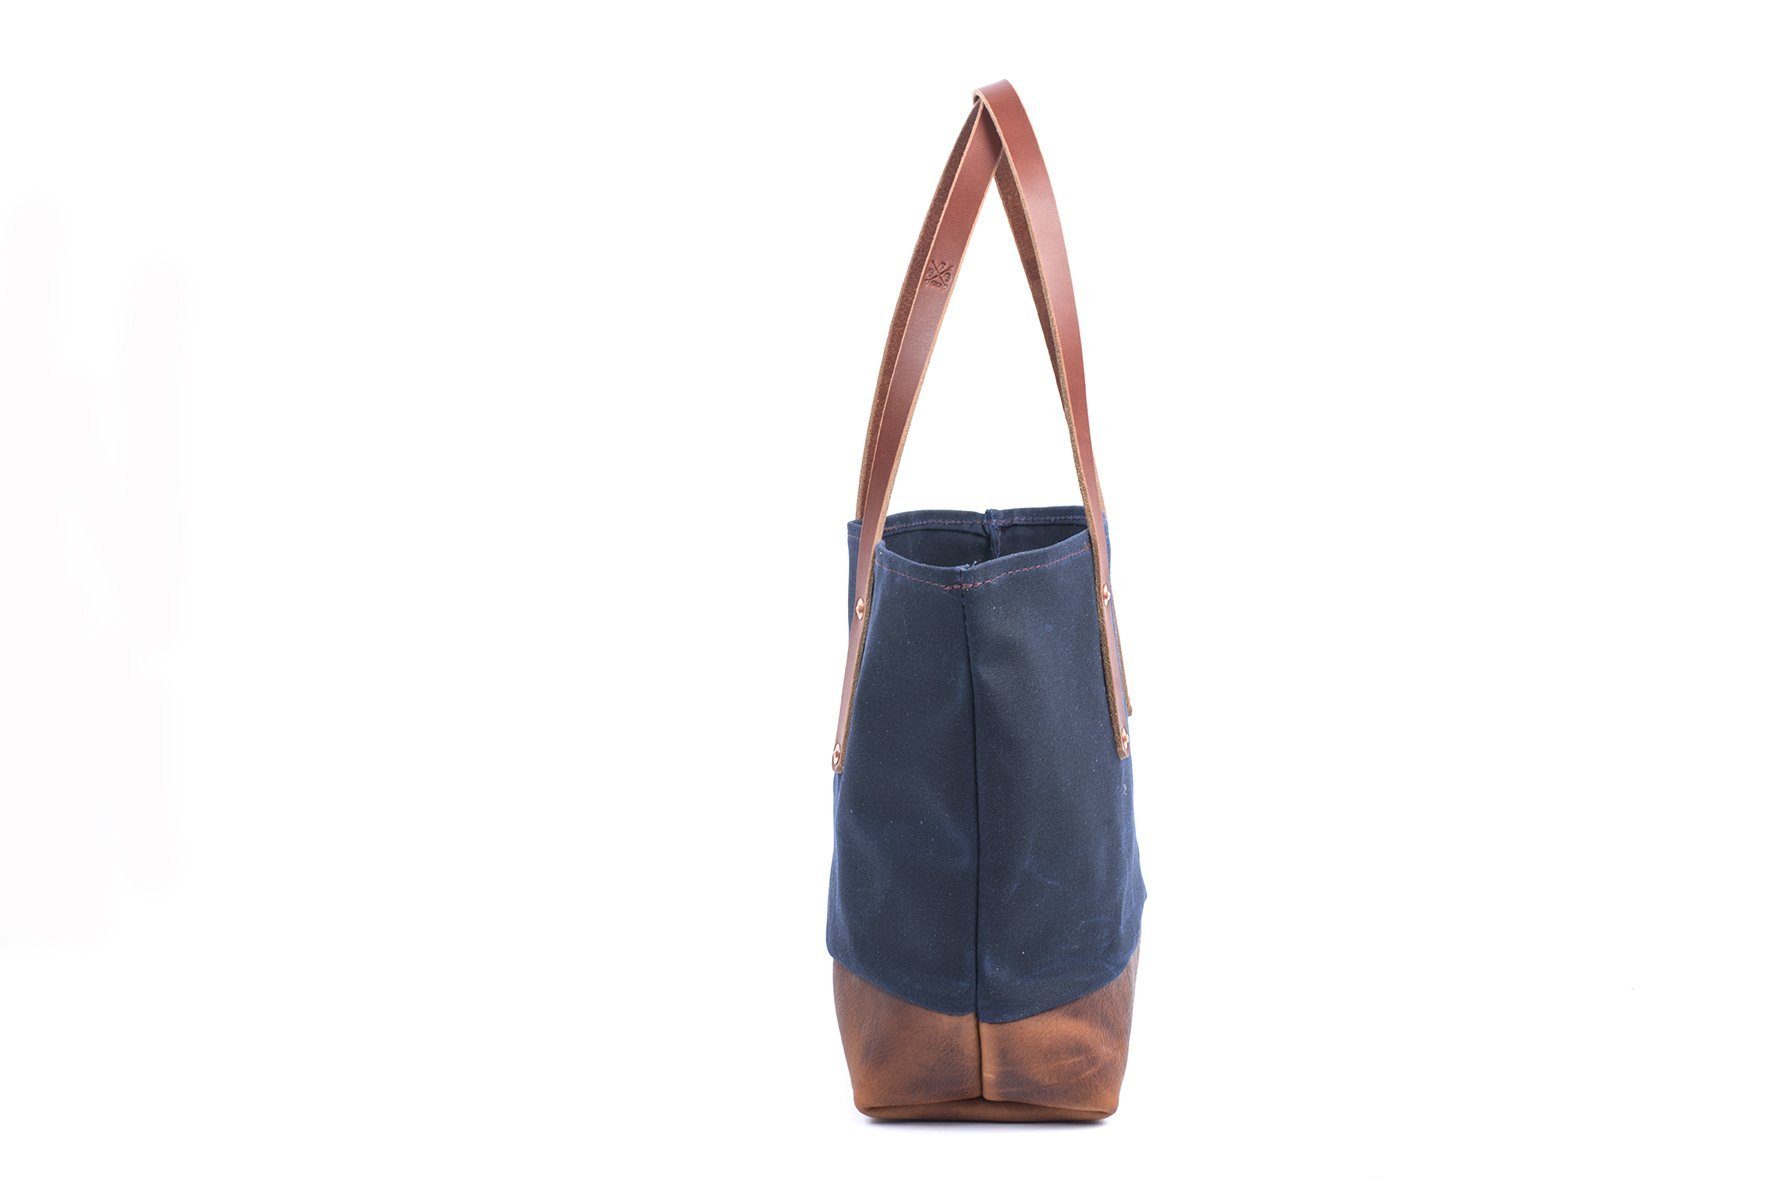 AVERY WAXED CANVAS TOTE BAG - MEDIUM - Go Forth Goods